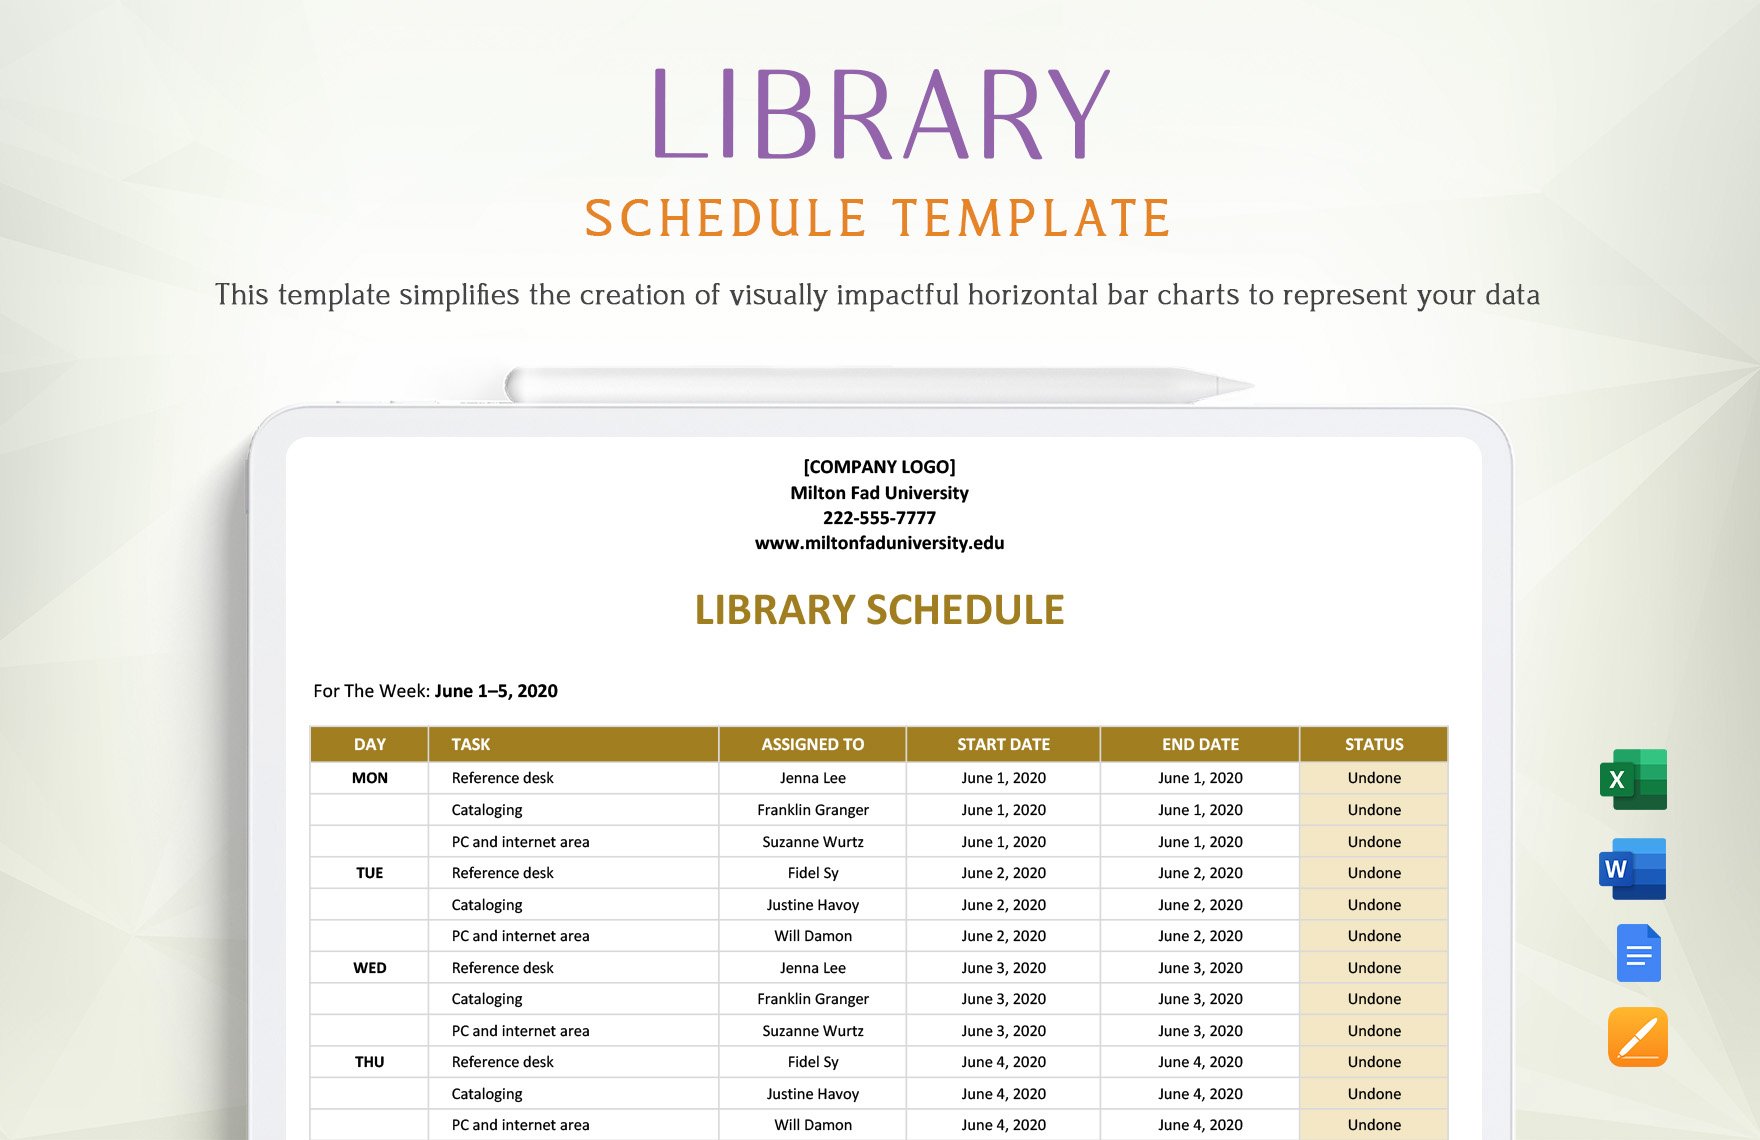 Library Schedule Template in Word, Google Docs, Excel, Apple Pages